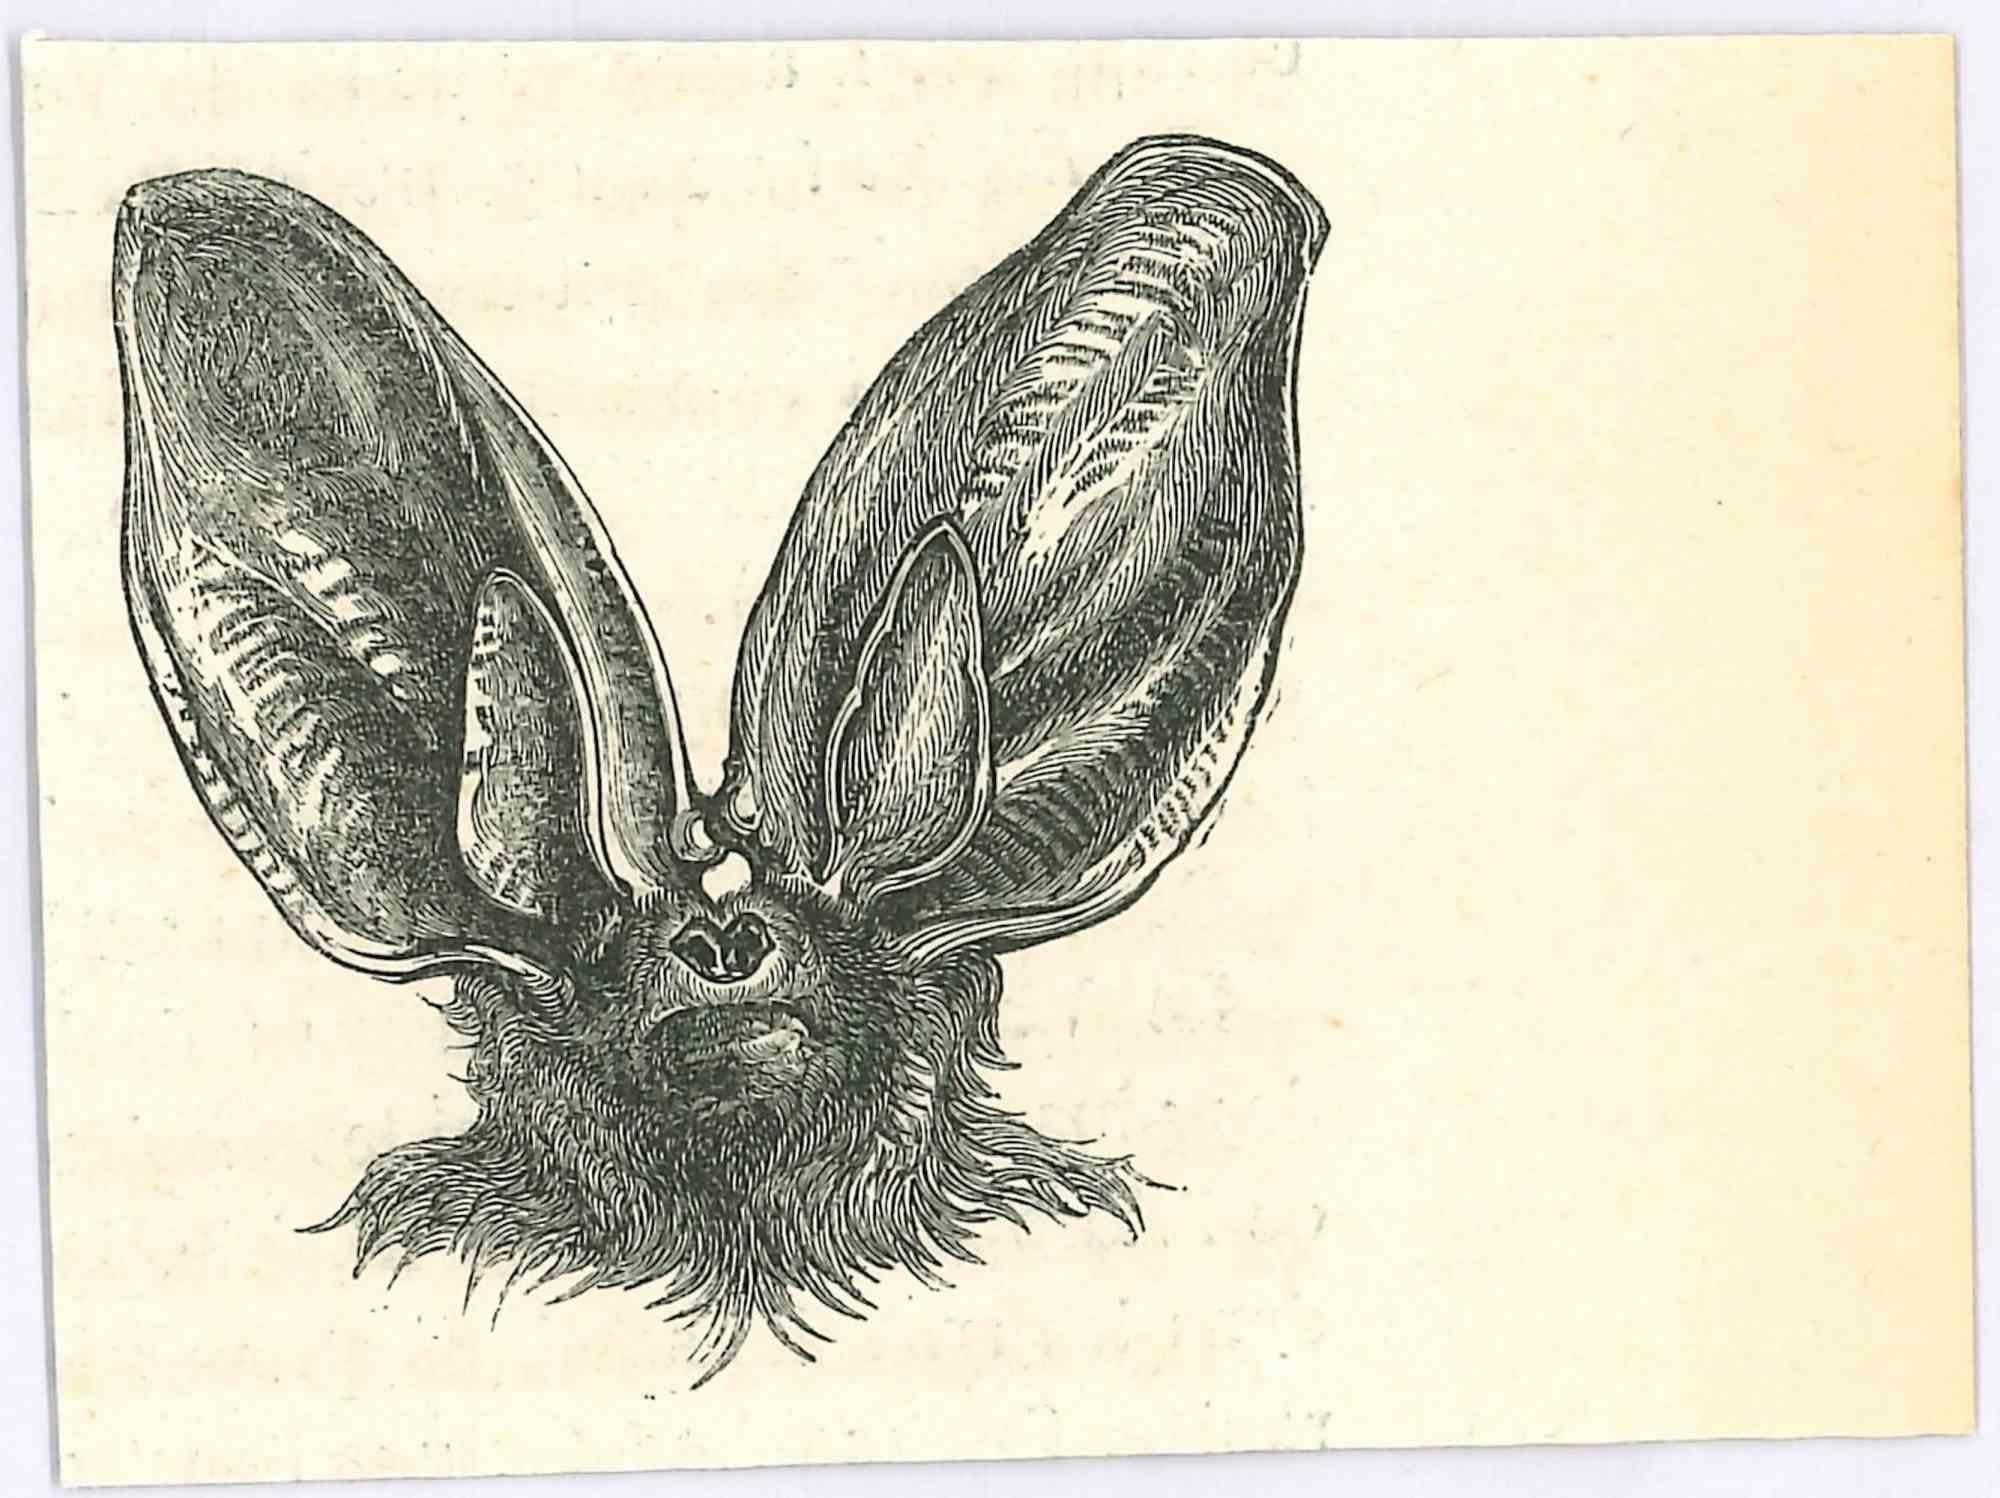 The Bat -Lithograph by Paul Gervais - 1854